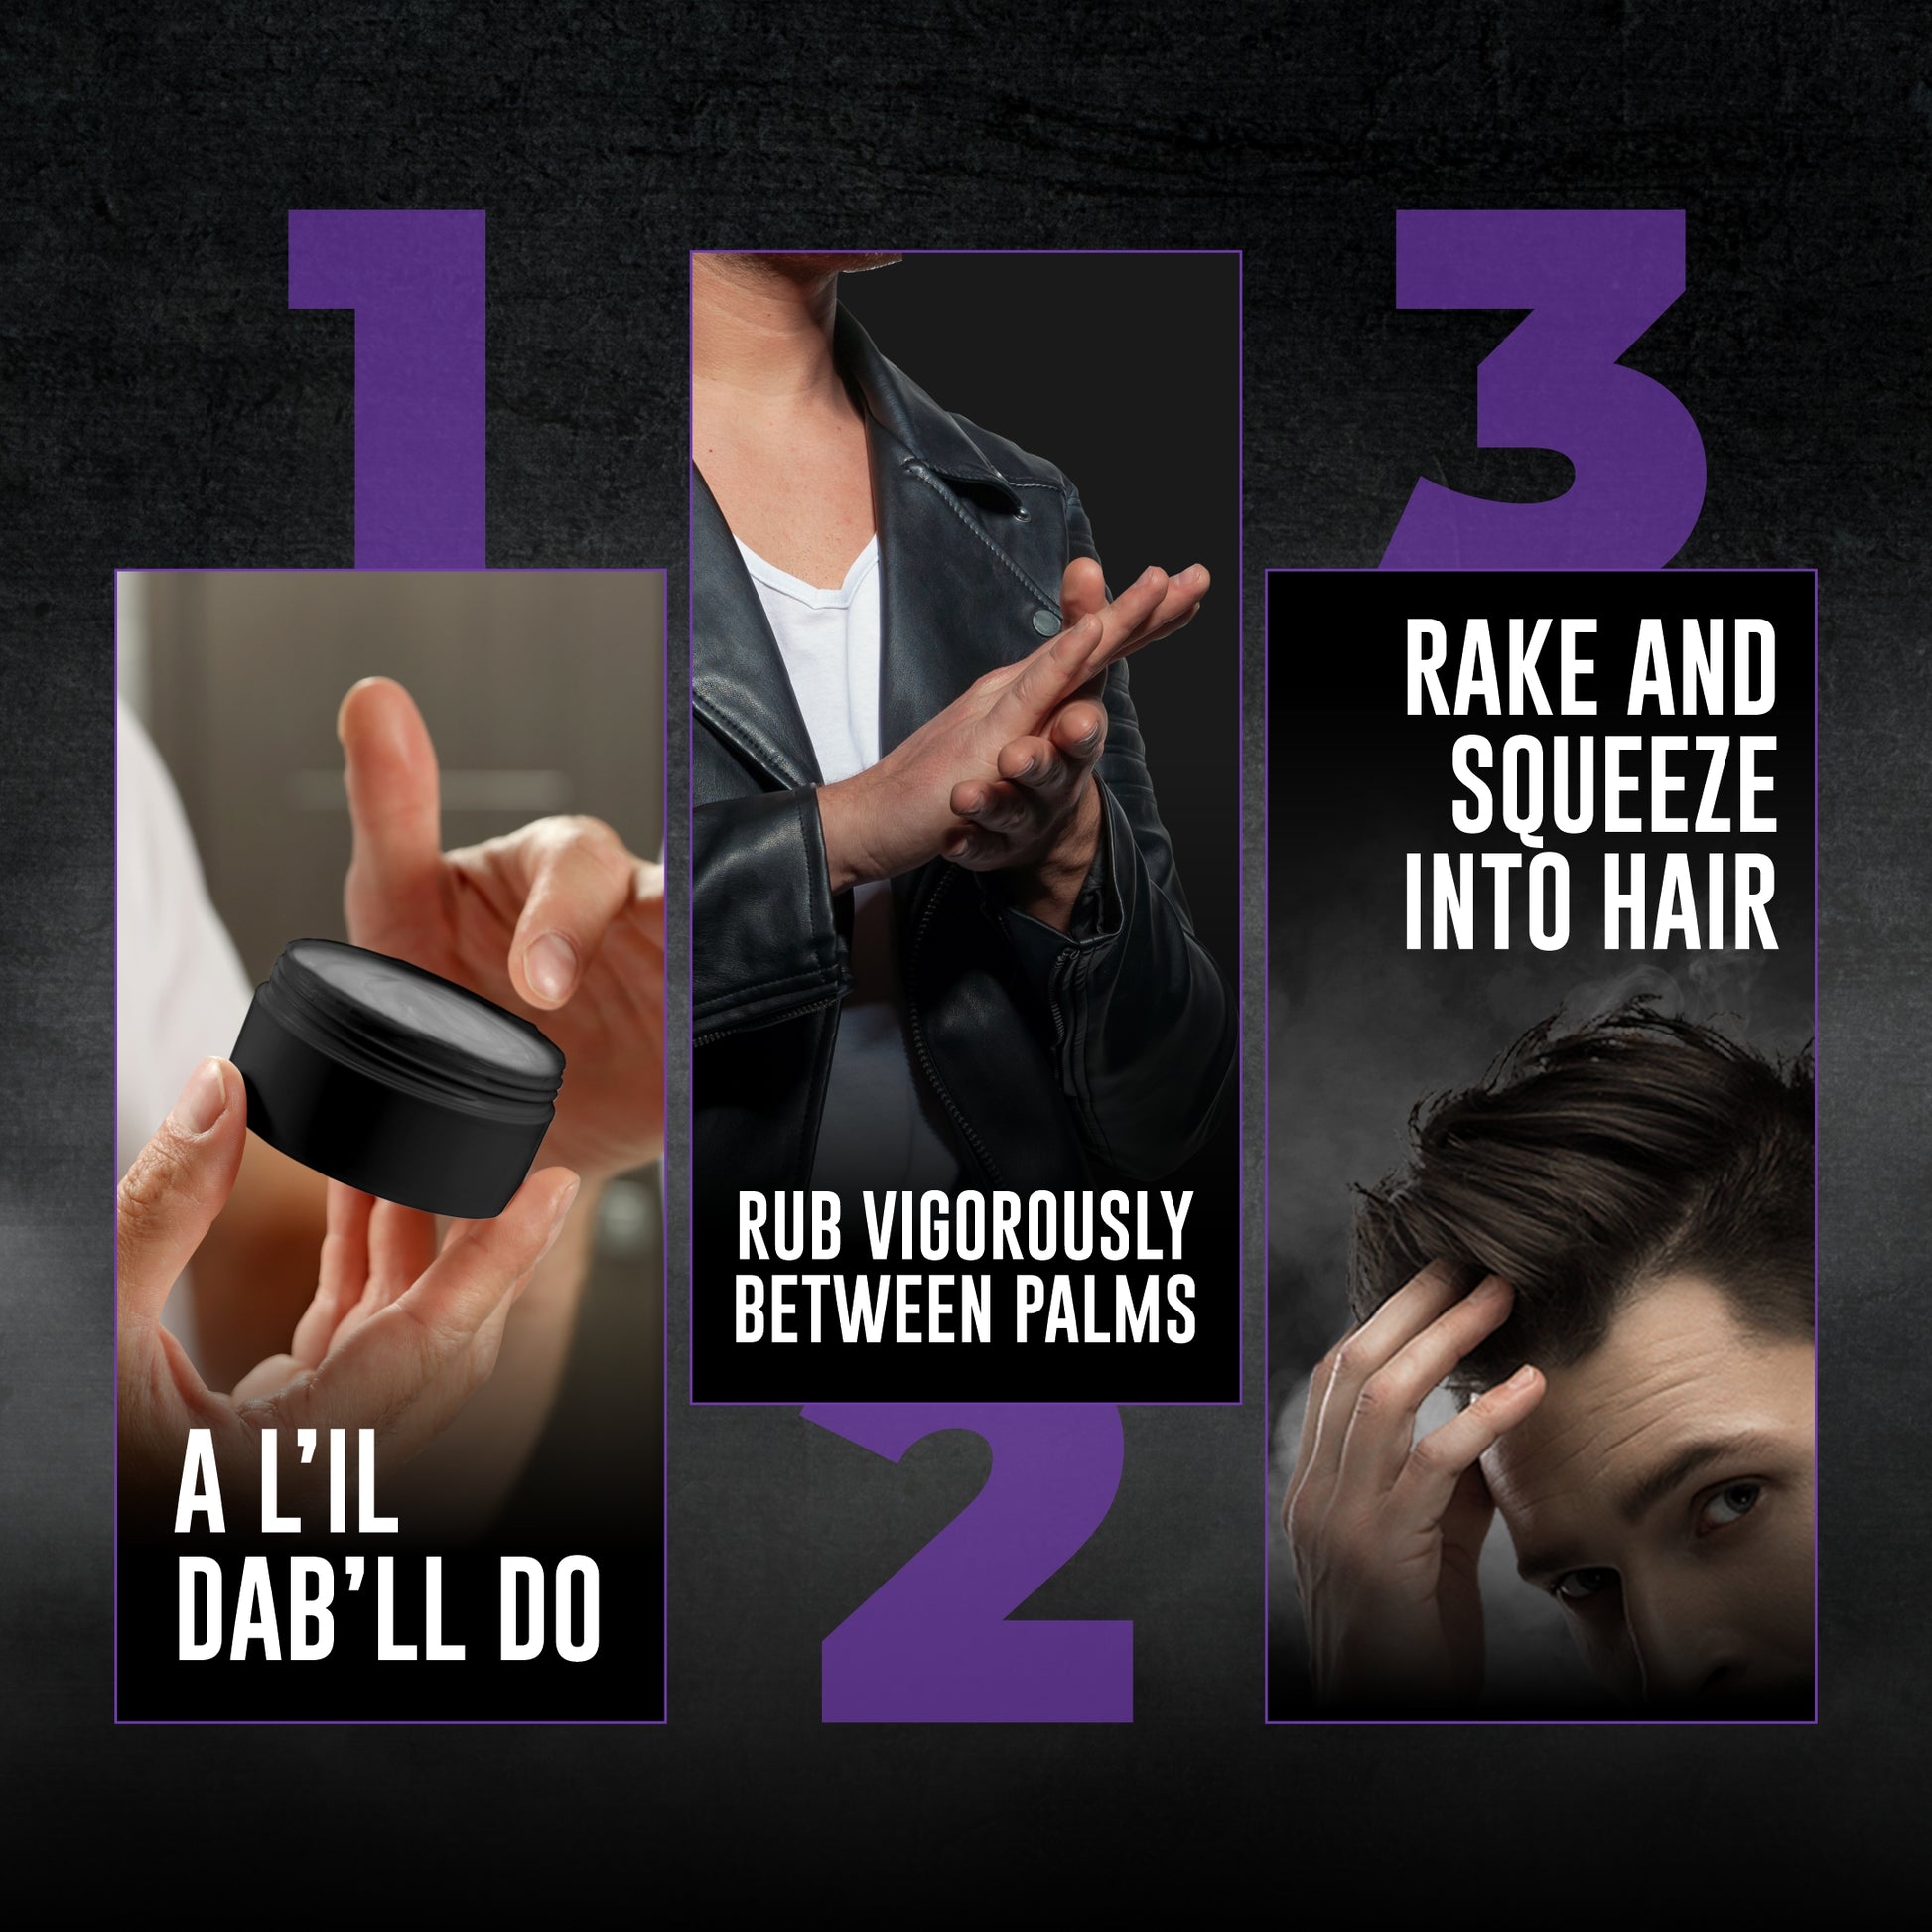 Which hair wax has the strongest hold? Which company hair wax is best?